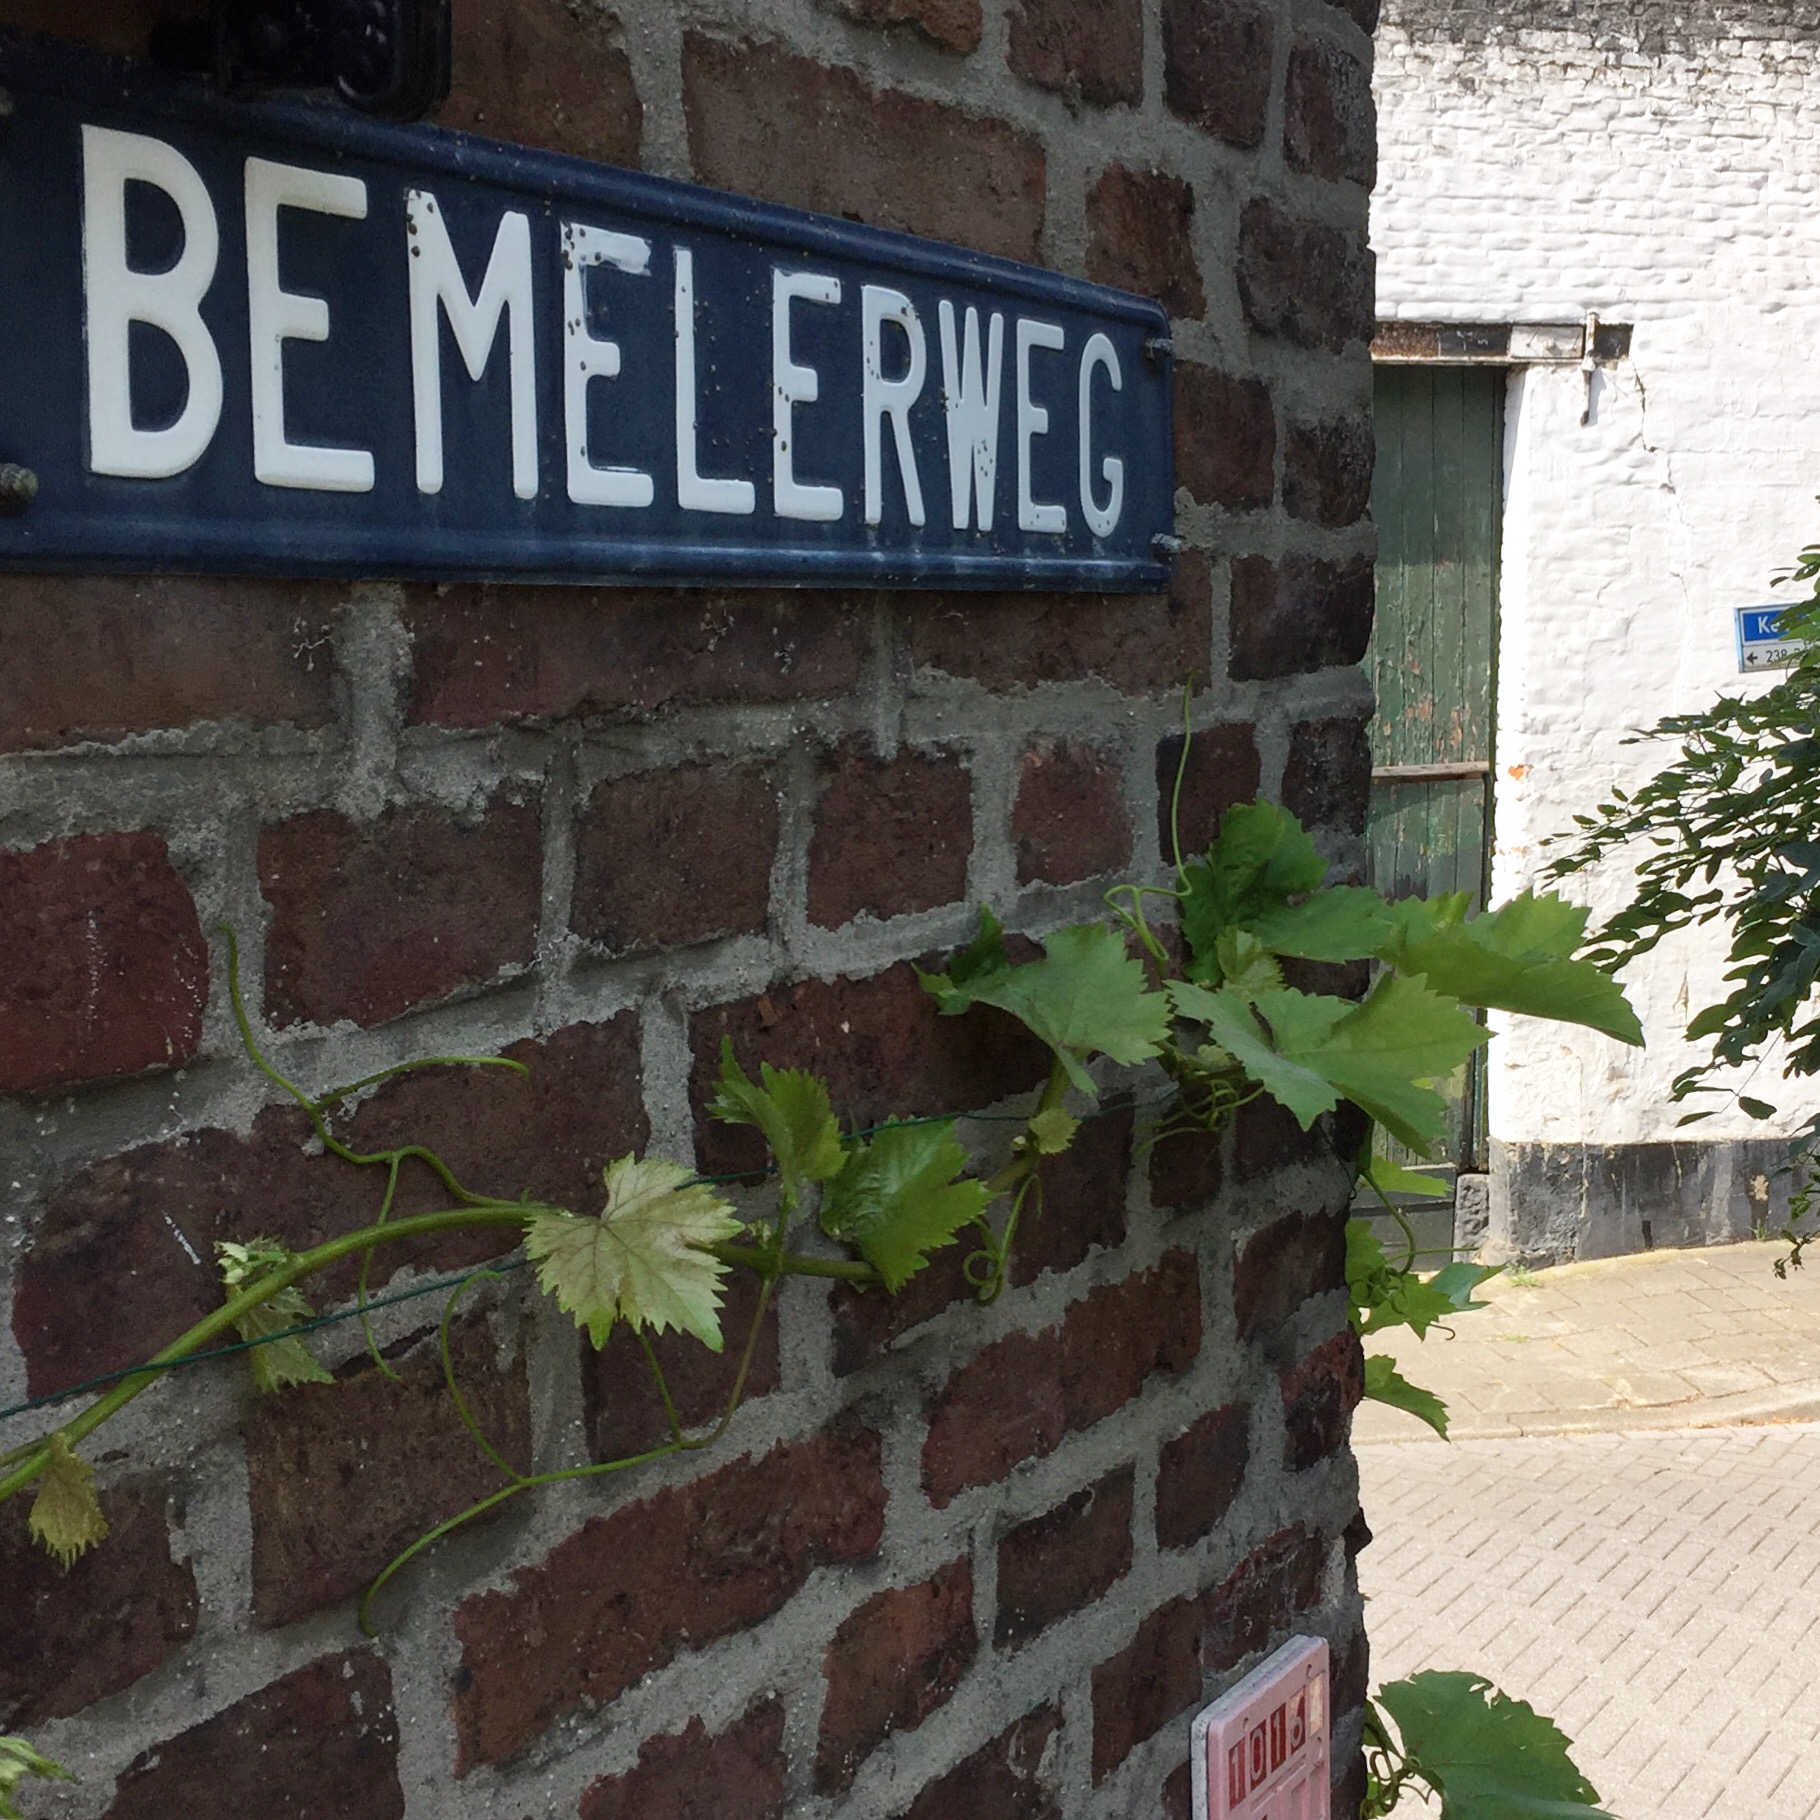 Name of the street where we can be found in Maastricht